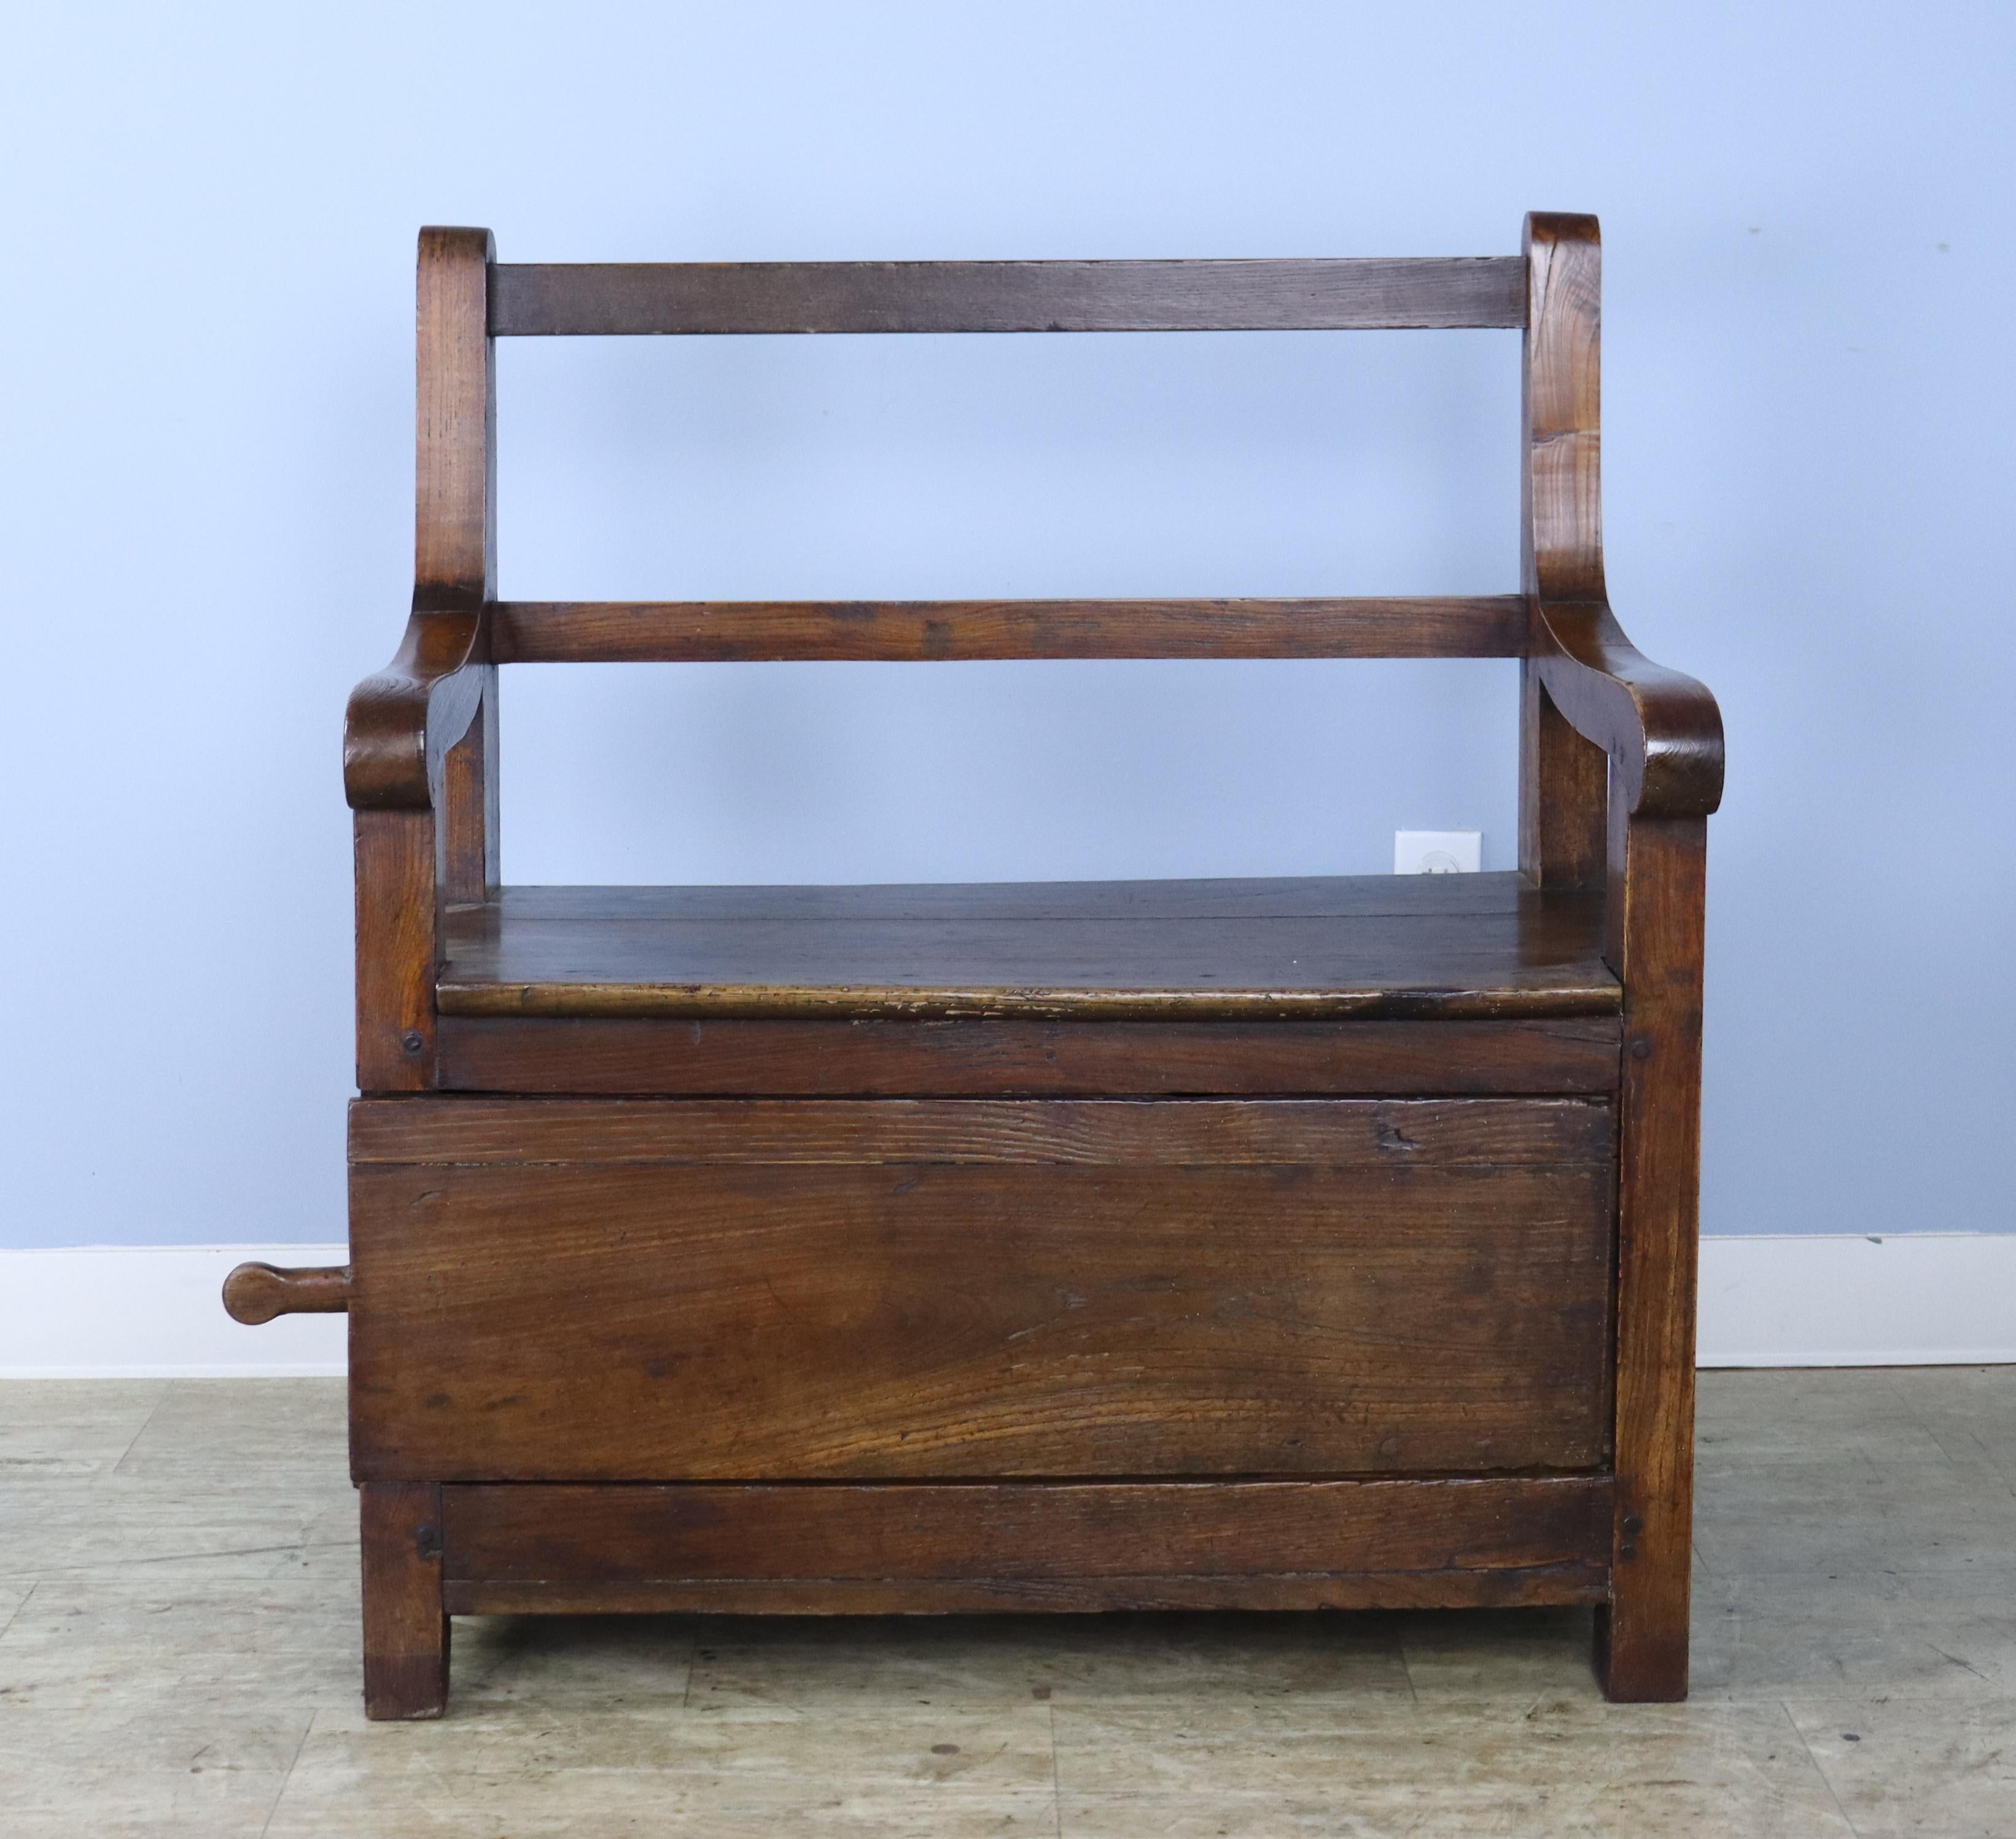 A sweet little bench for the hallway, bedroom or fire side. Mellow chestnut with lovely patina and charming inset panels. The sliding storage door with hand carved handle opens esily to a roomy compartment.